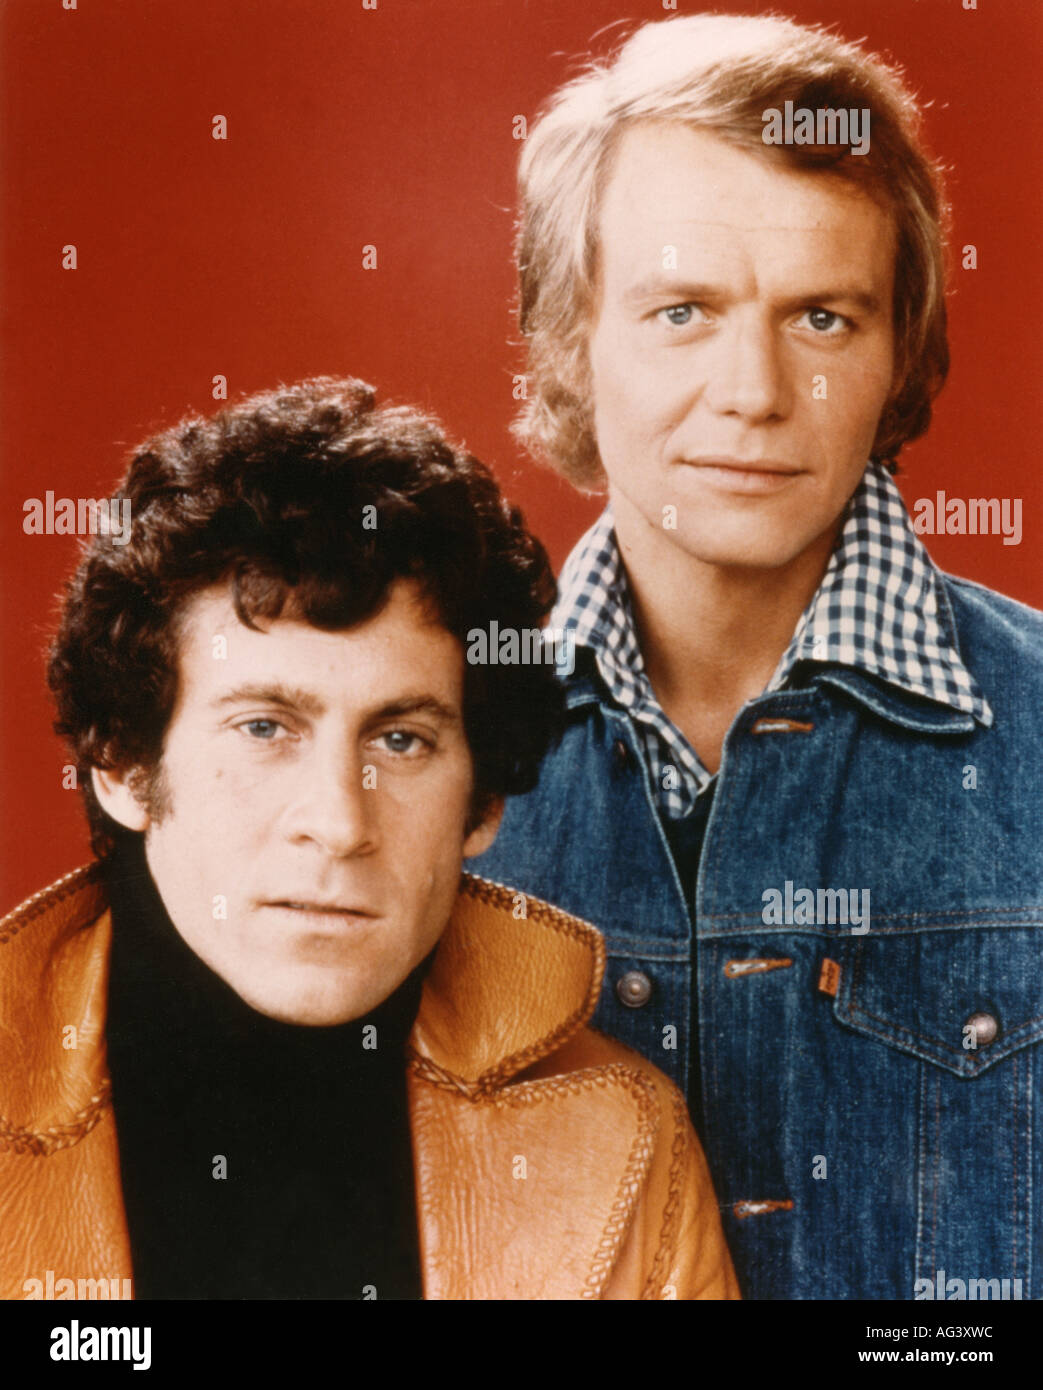 https://c8.alamy.com/comp/AG3XWC/starsky-and-hutch-us-tv-series-1975-to-1979-starring-paul-michael-AG3XWC.jpg